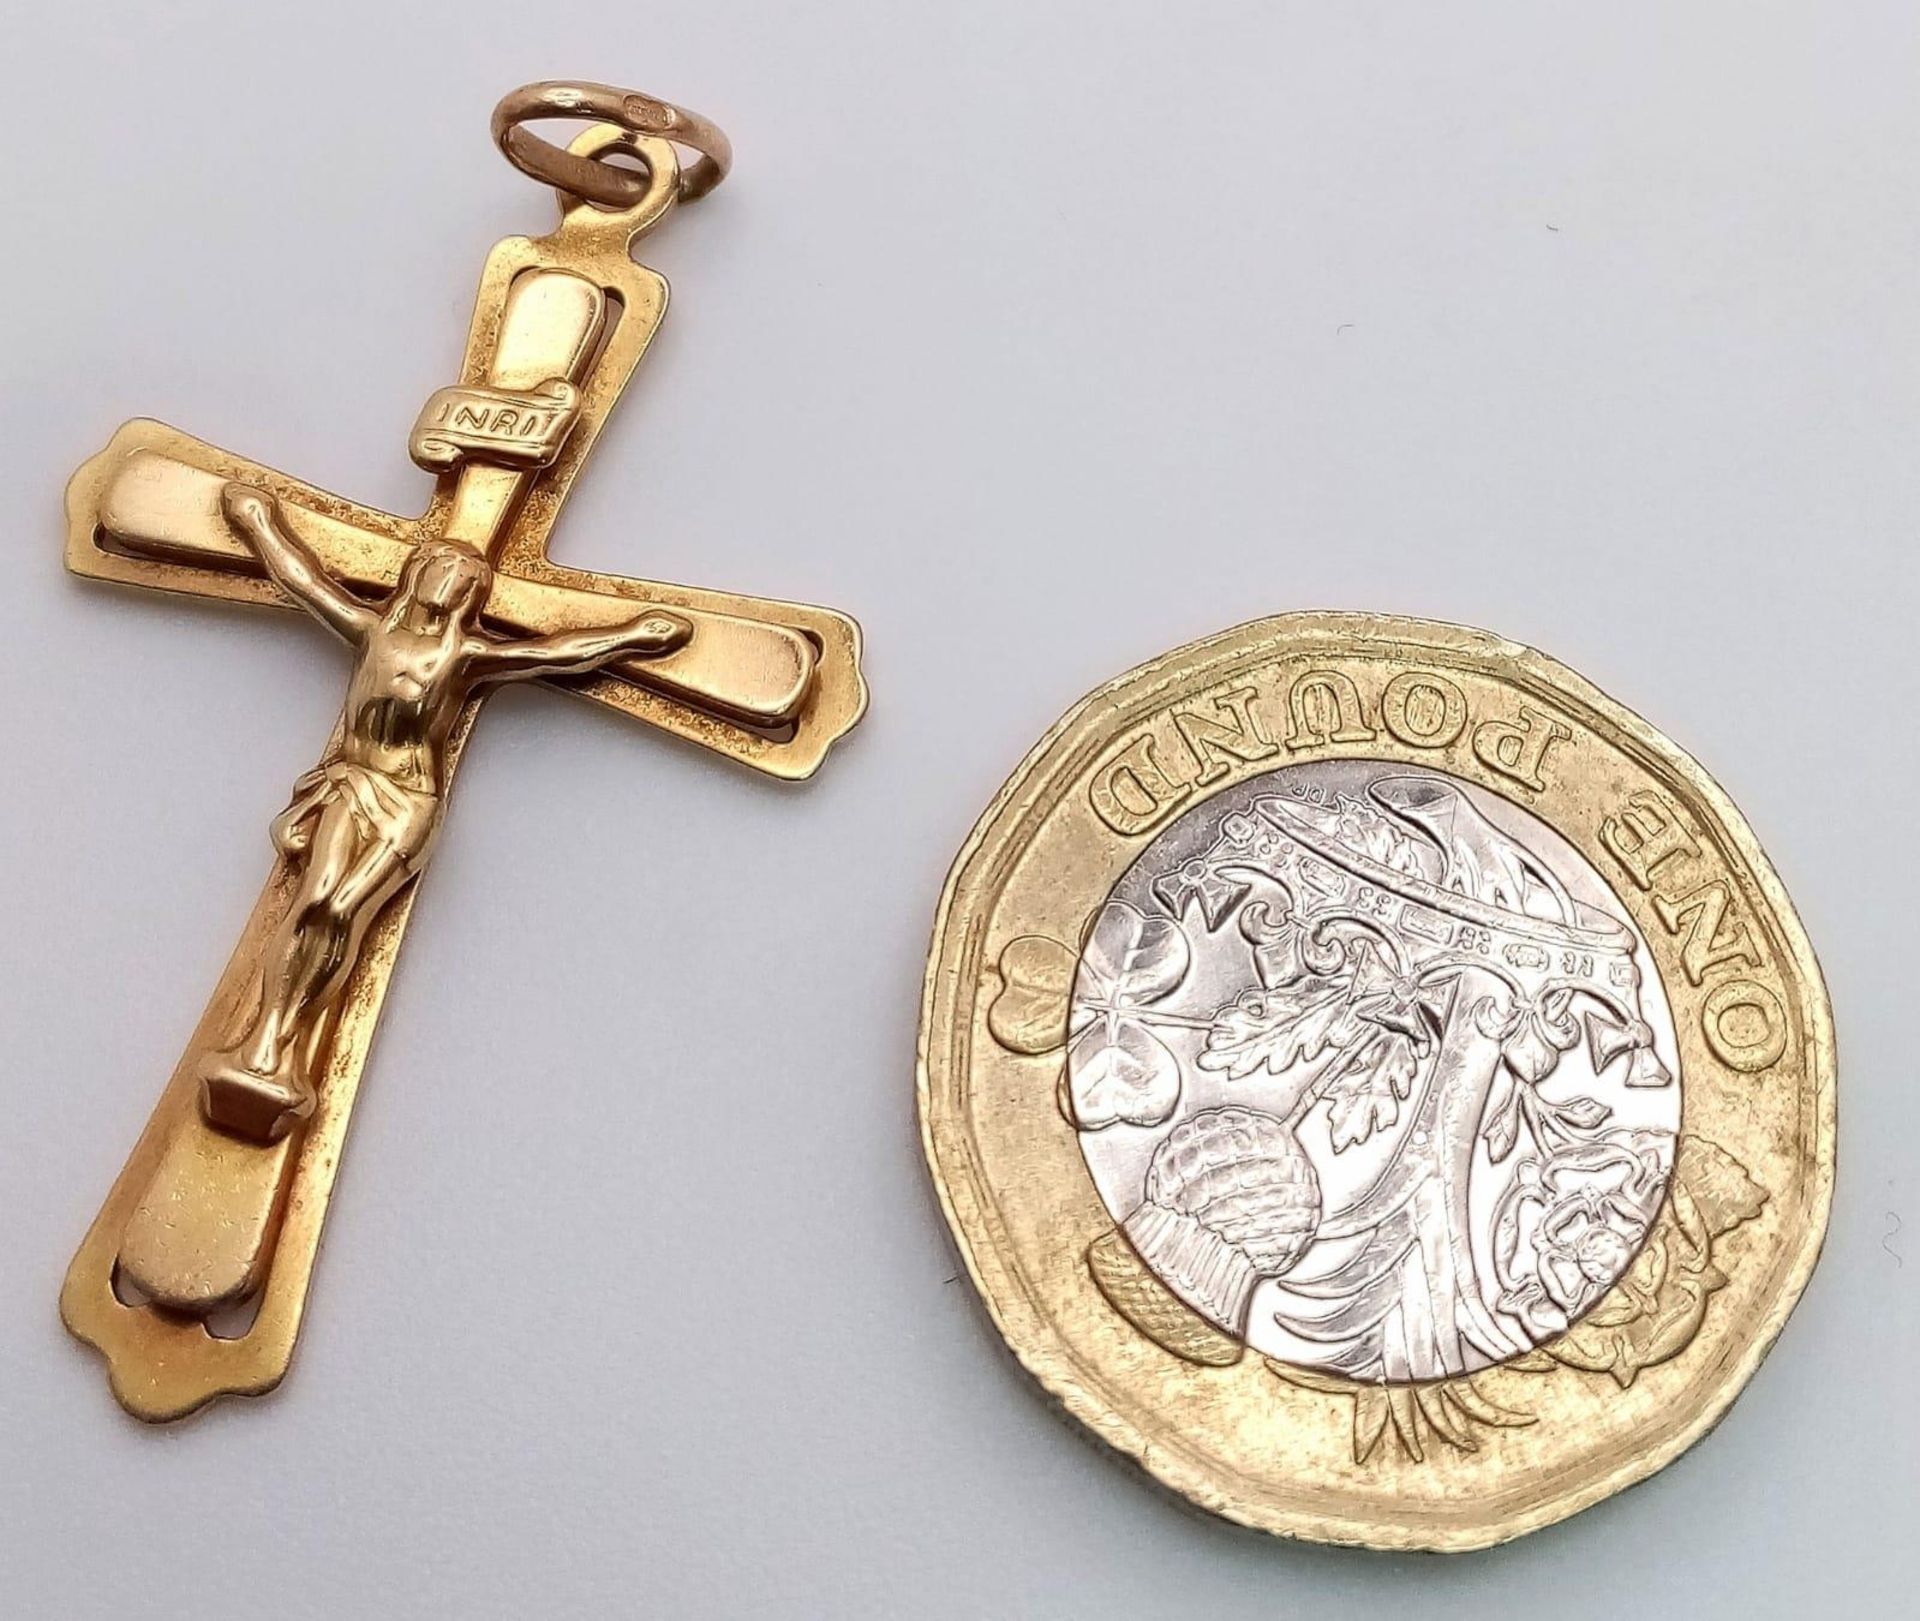 9K Yellow Gold Crucifix Pendant, 2.5g total weight - Image 3 of 3